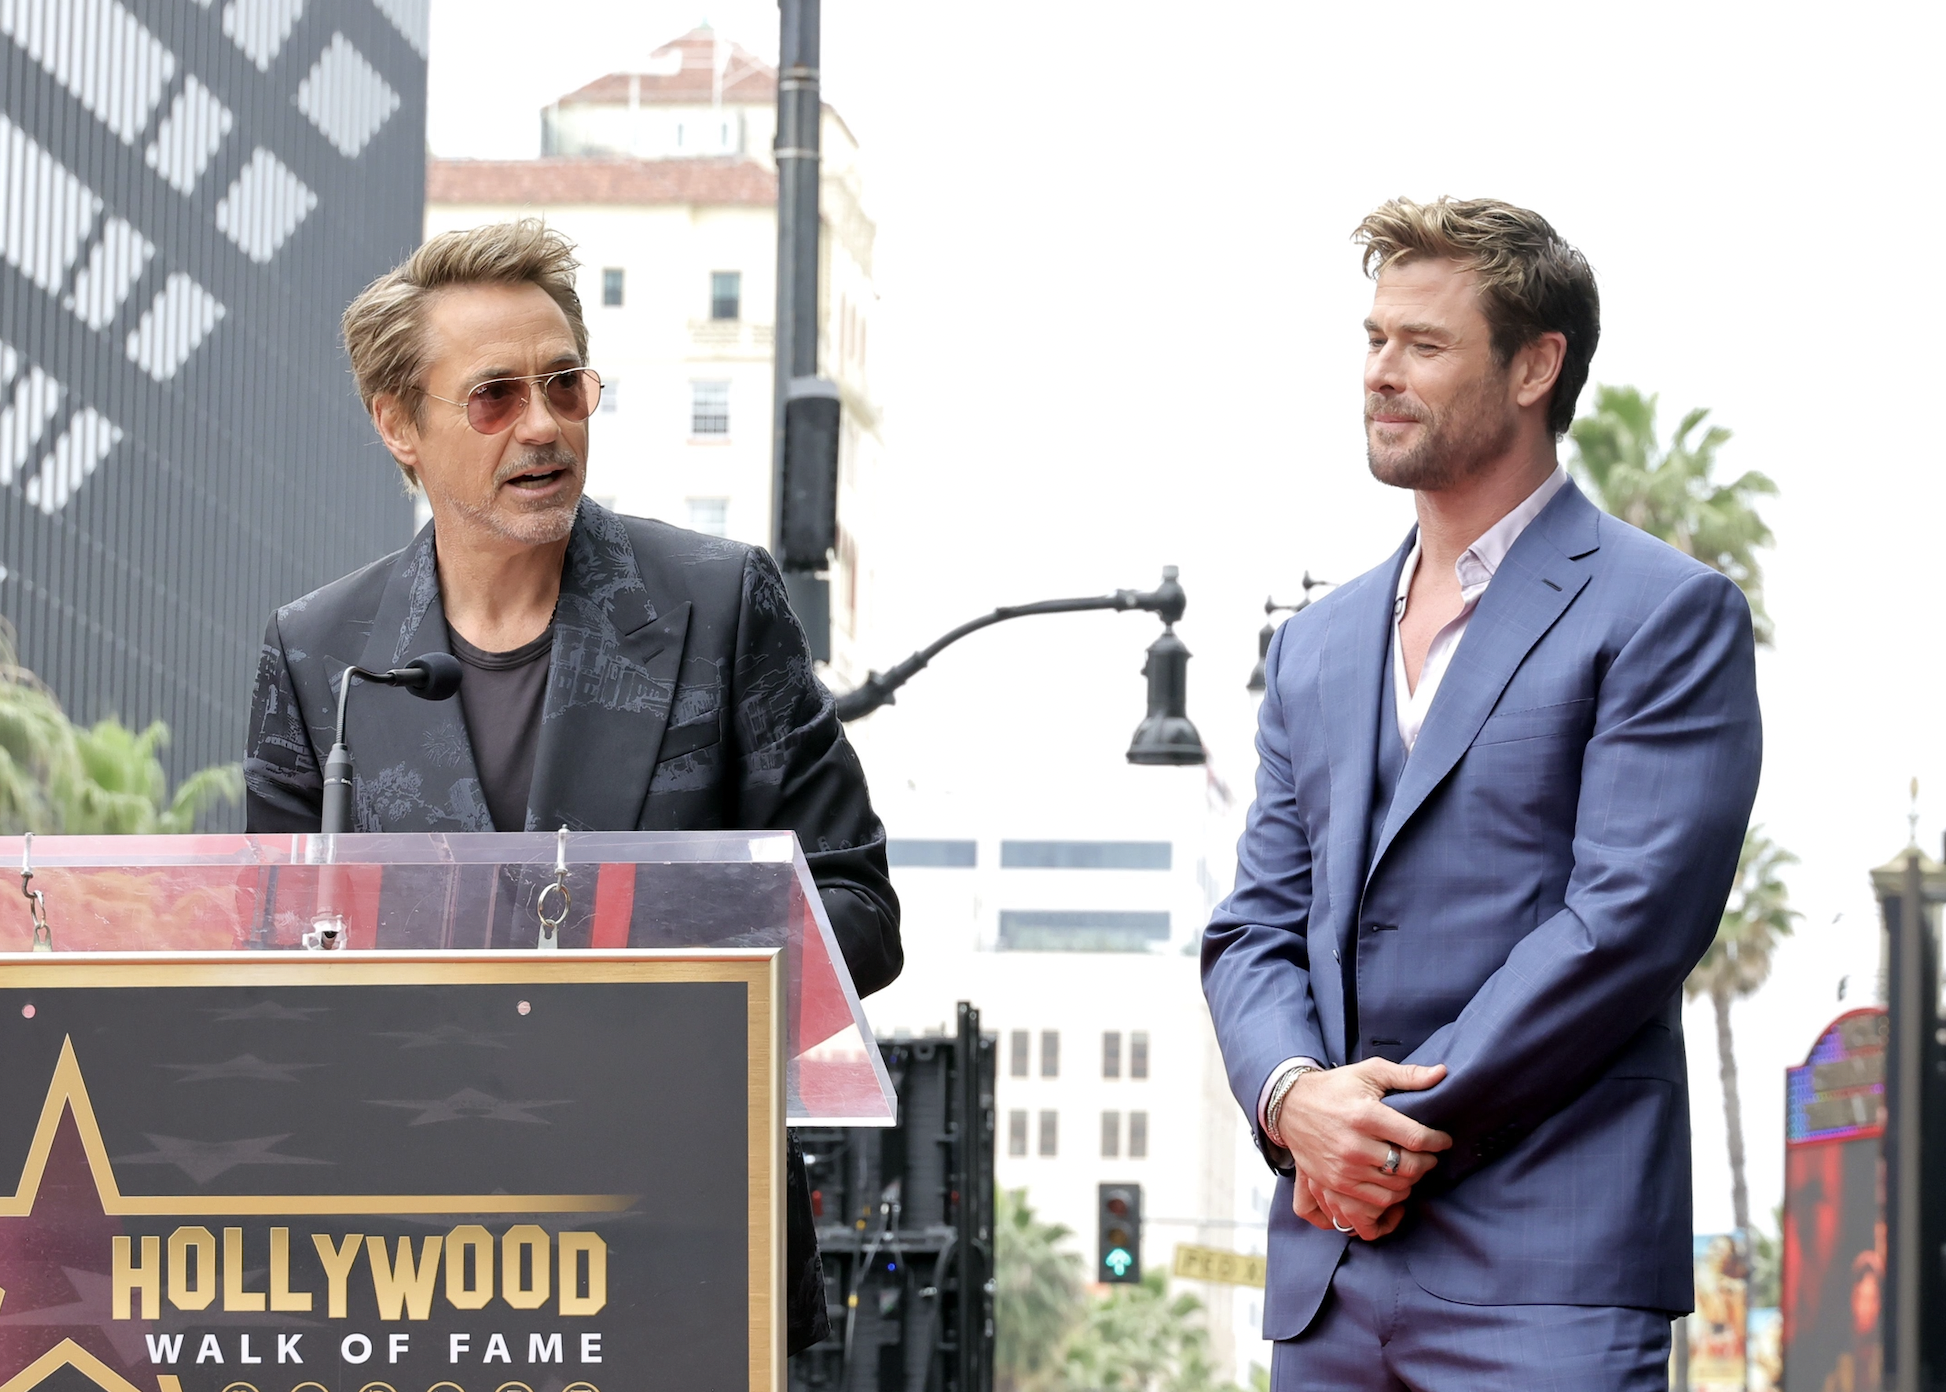 ...Robert Downey Jr. Roasts Chris Hemsworth by Asking ‘Avengers’ Cast to Describe ‘Thor’ Star in Three Words; Chris Evans Says...